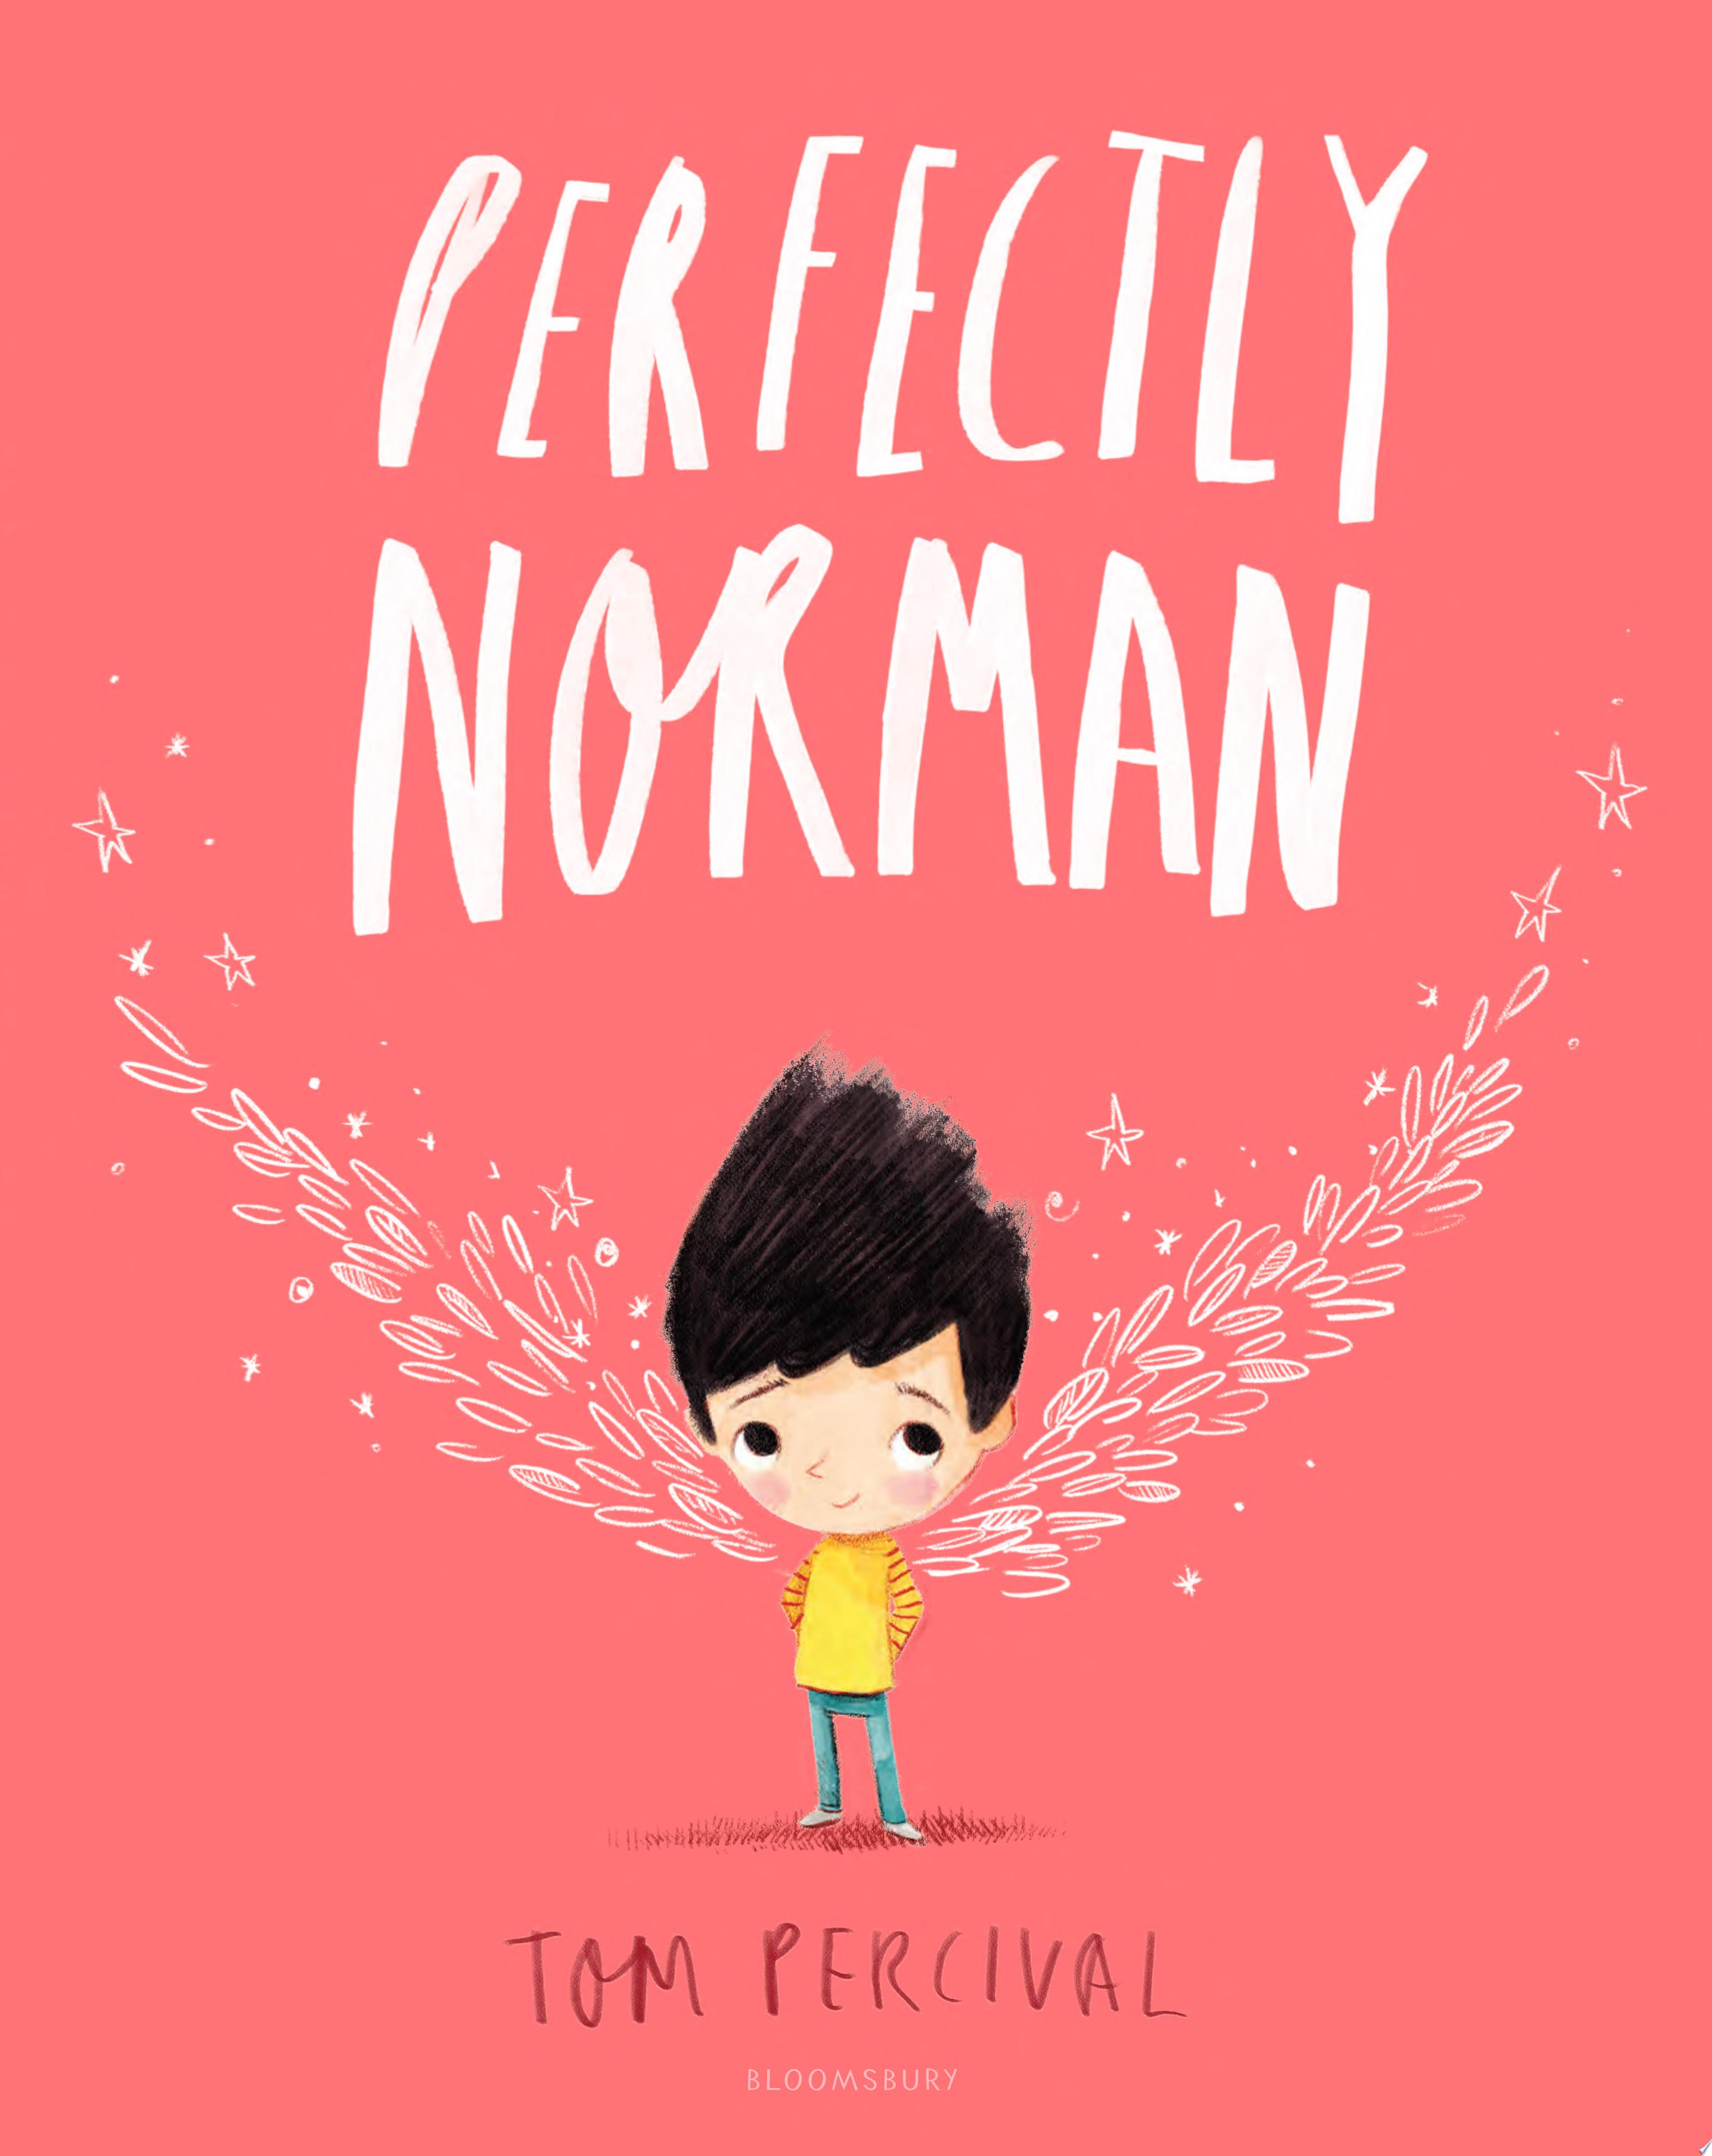 Image for "Perfectly Norman"